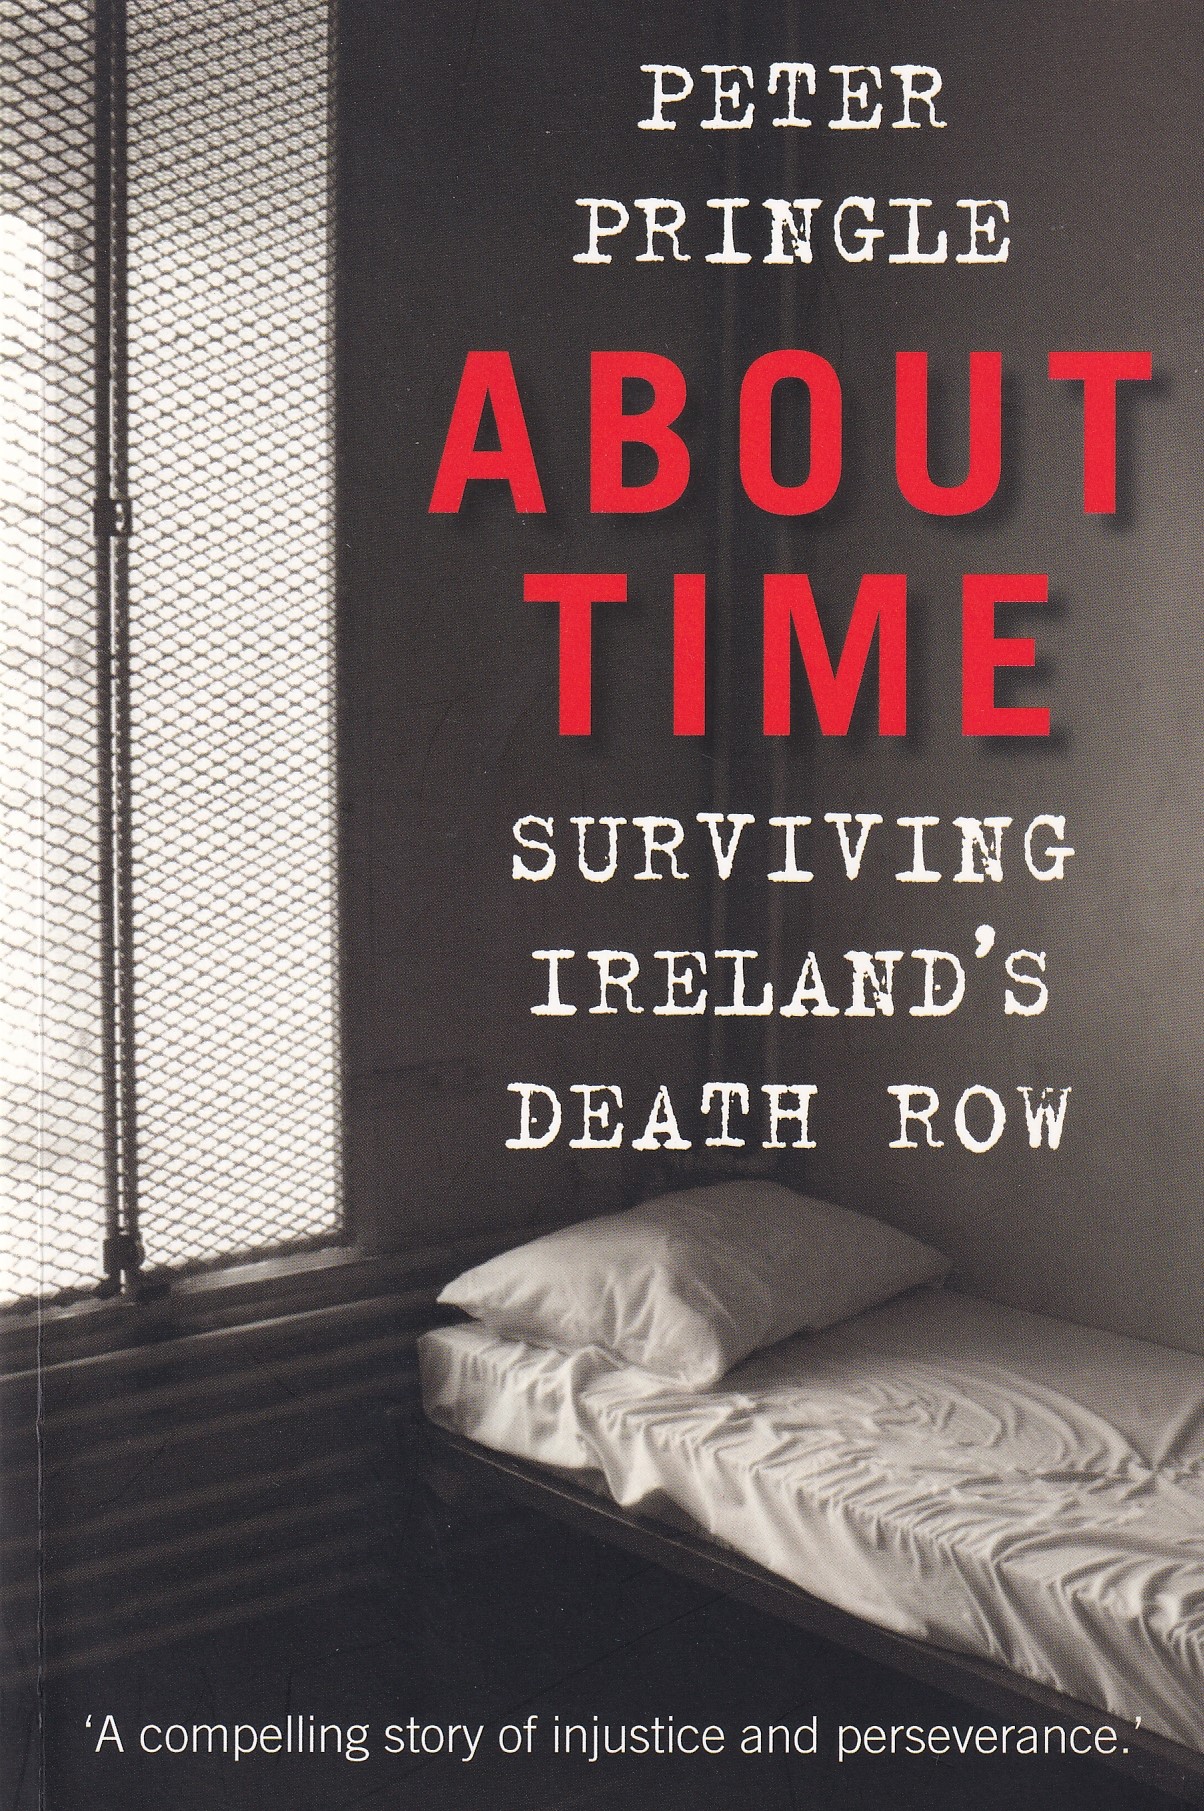 About Time: Surviving Ireland’s Death Row (Signed) | Pringle, Peter | Charlie Byrne's